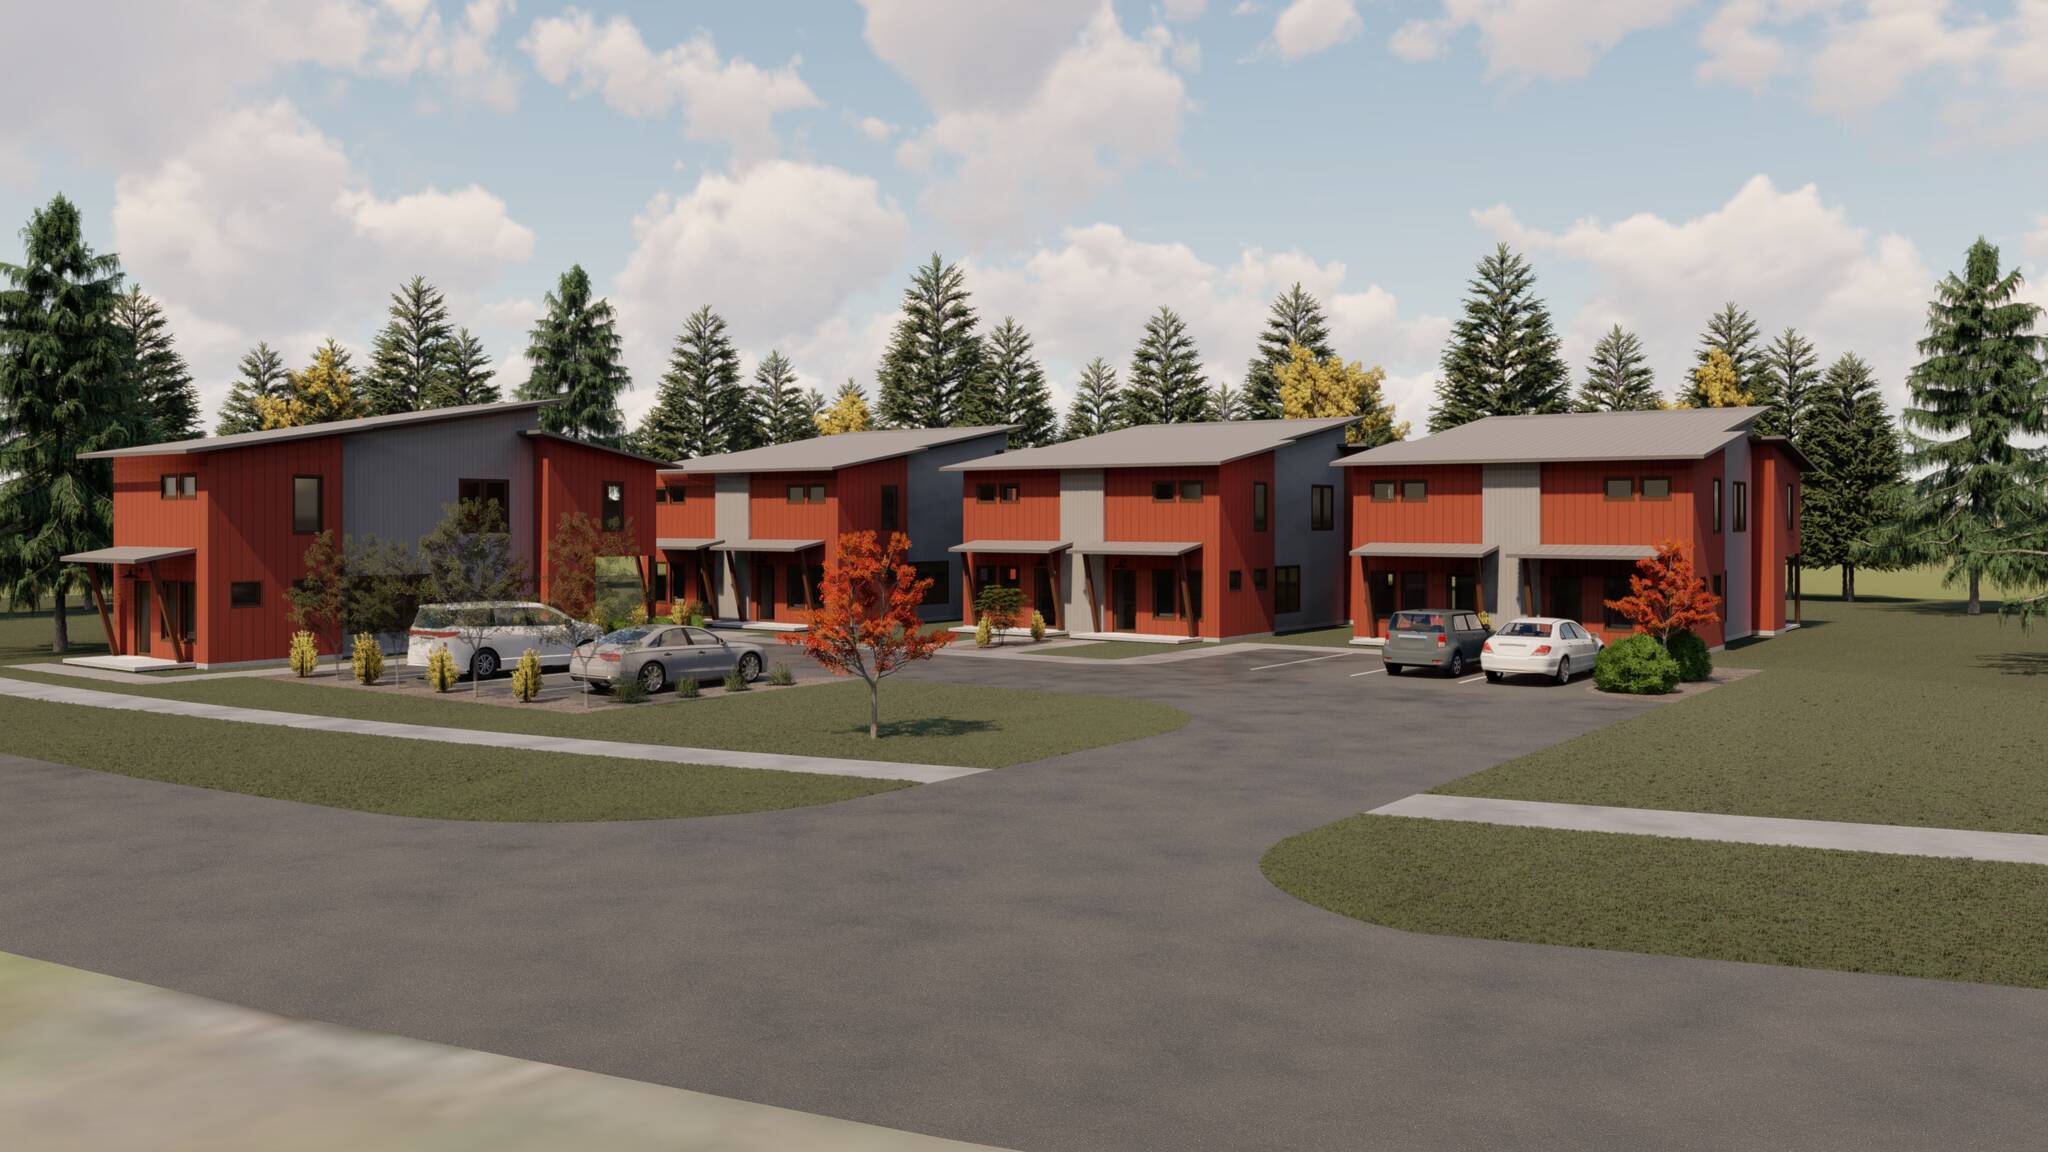 Photo provided
This rendering shows the seven Heron Park Townhomes slated for construction within Langley city limits.